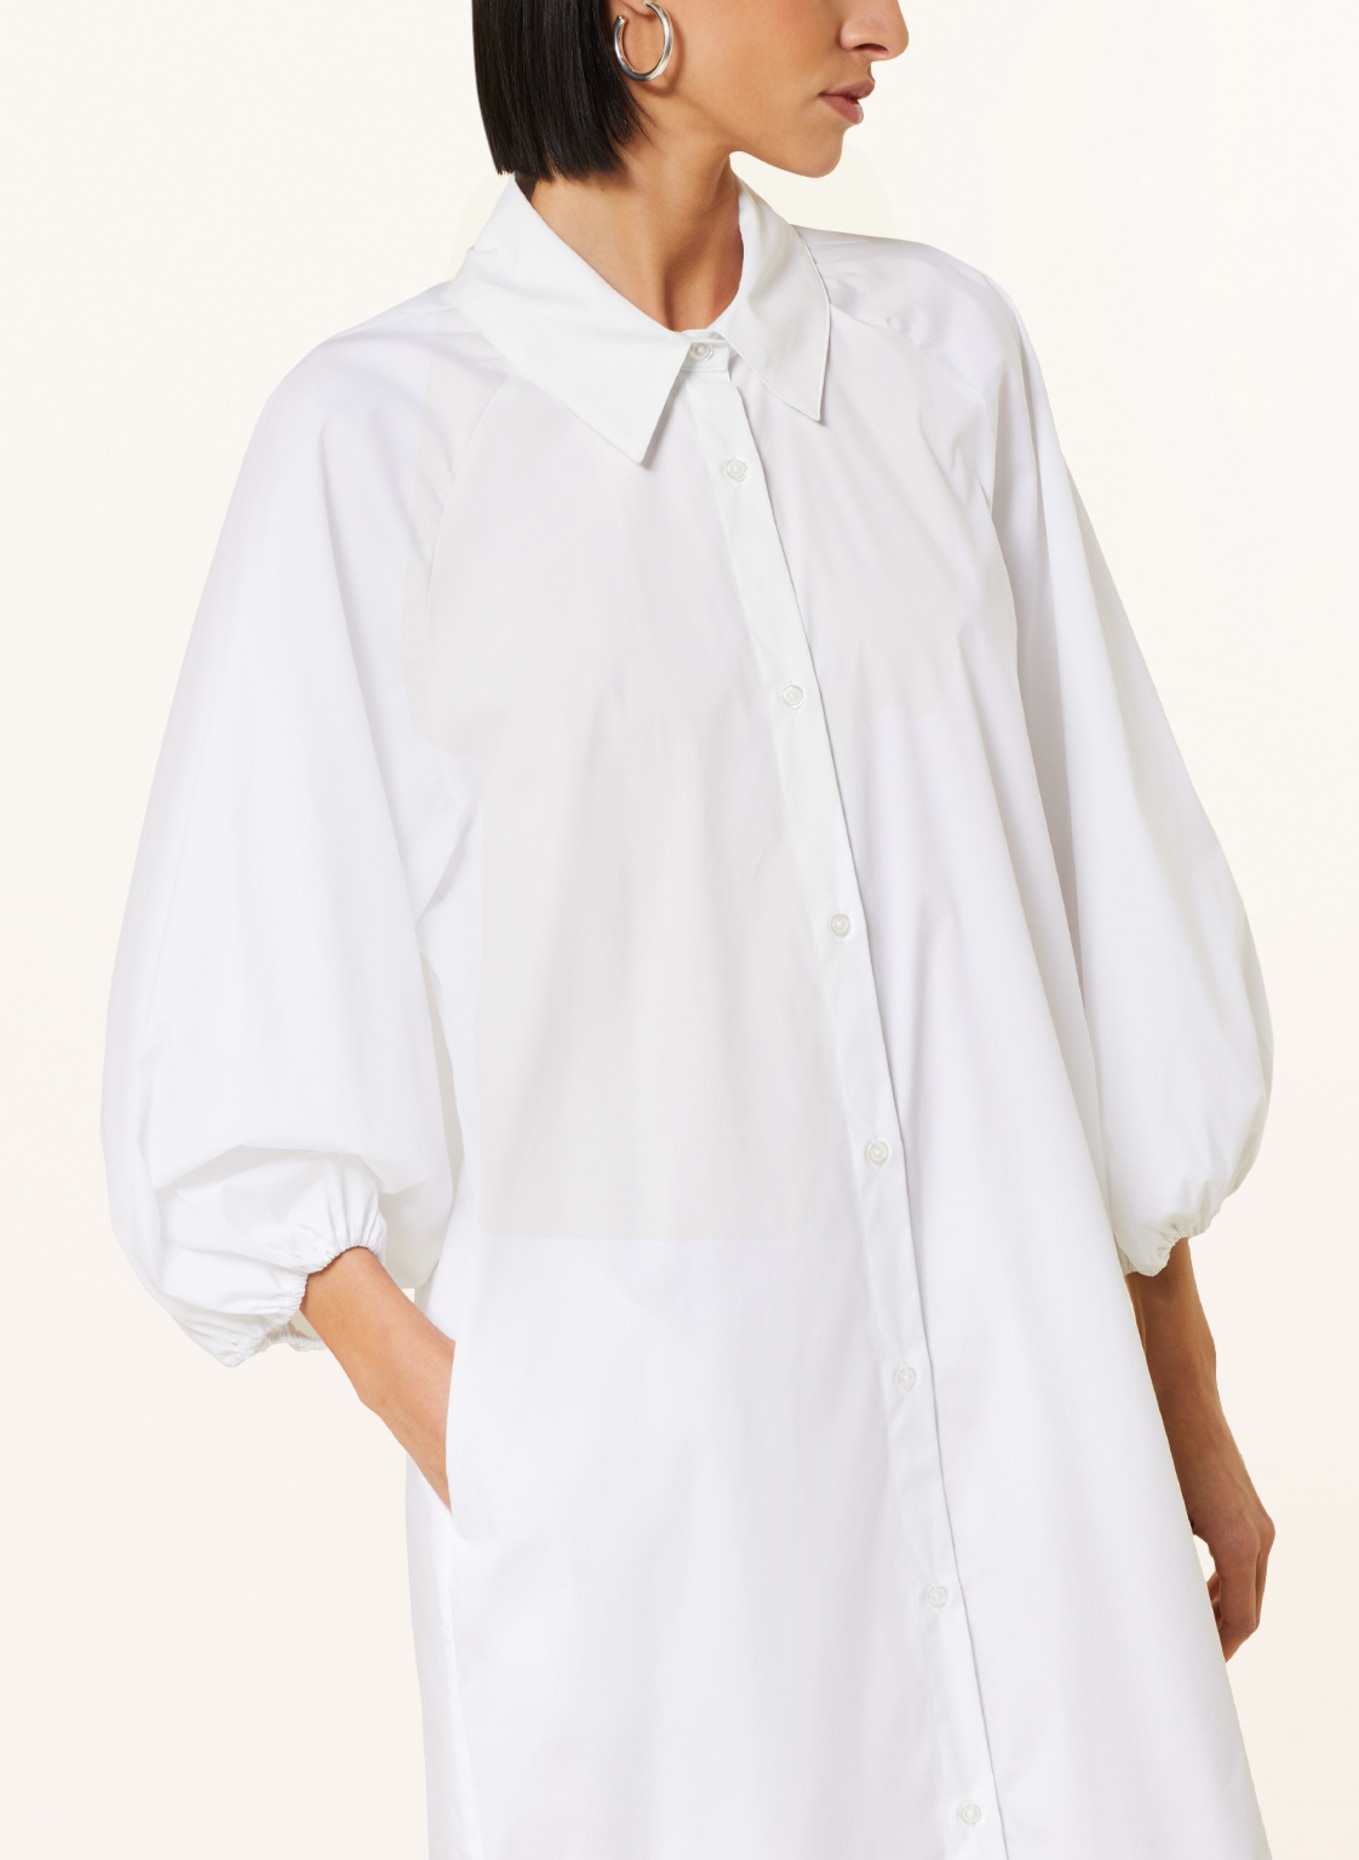 MRS & HUGS Shirt dress with 3/4 sleeves, Color: WHITE (Image 4)